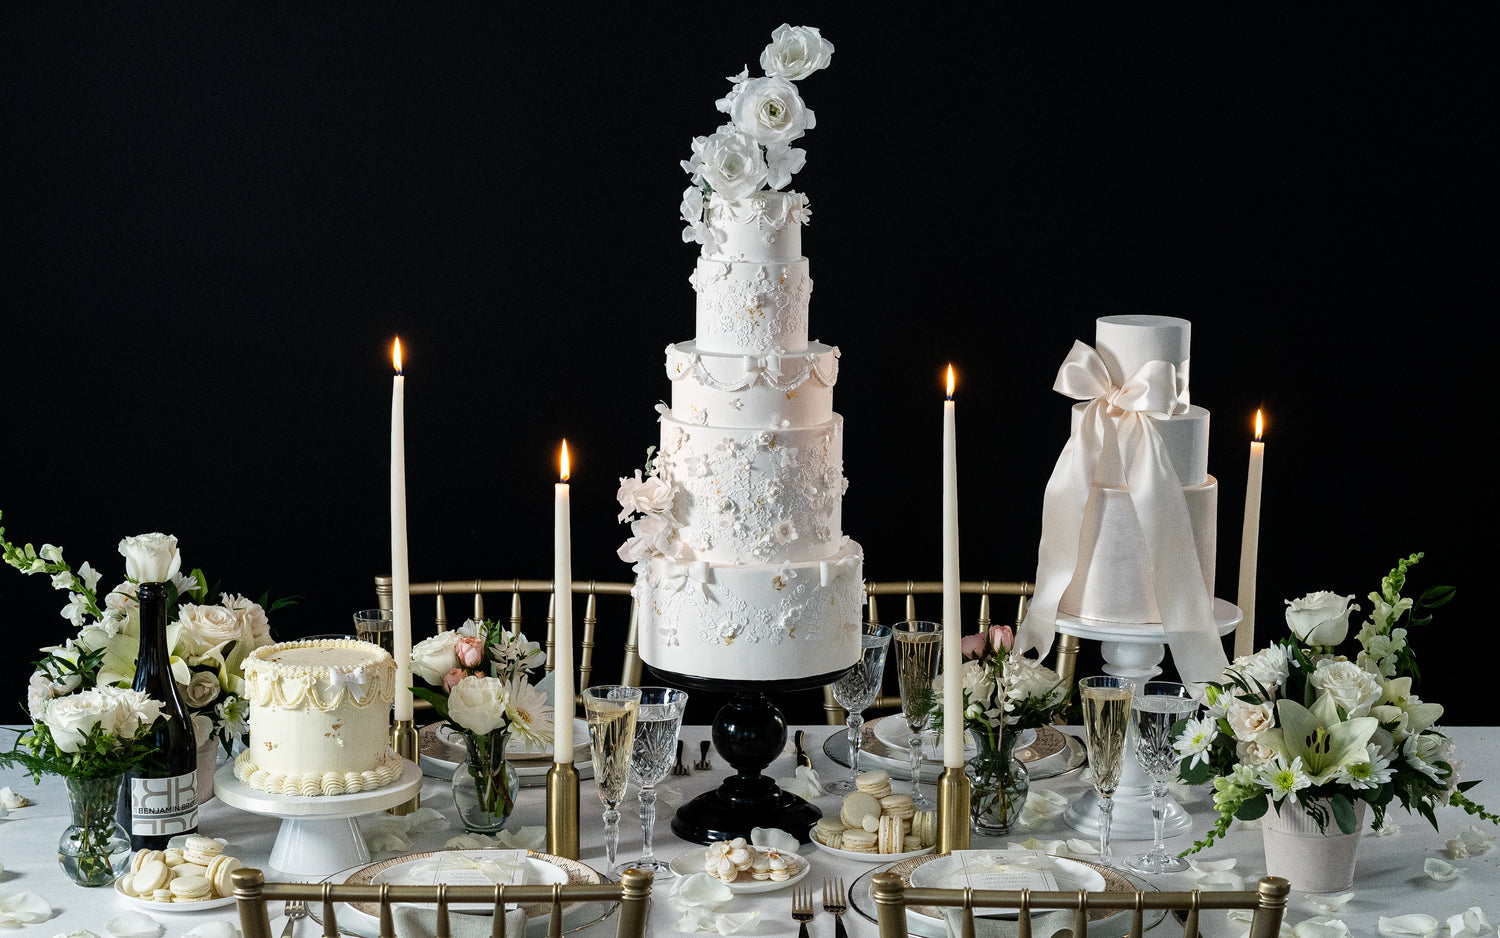 elegant black and white wedding cakes with flowers roses peonies and macarons